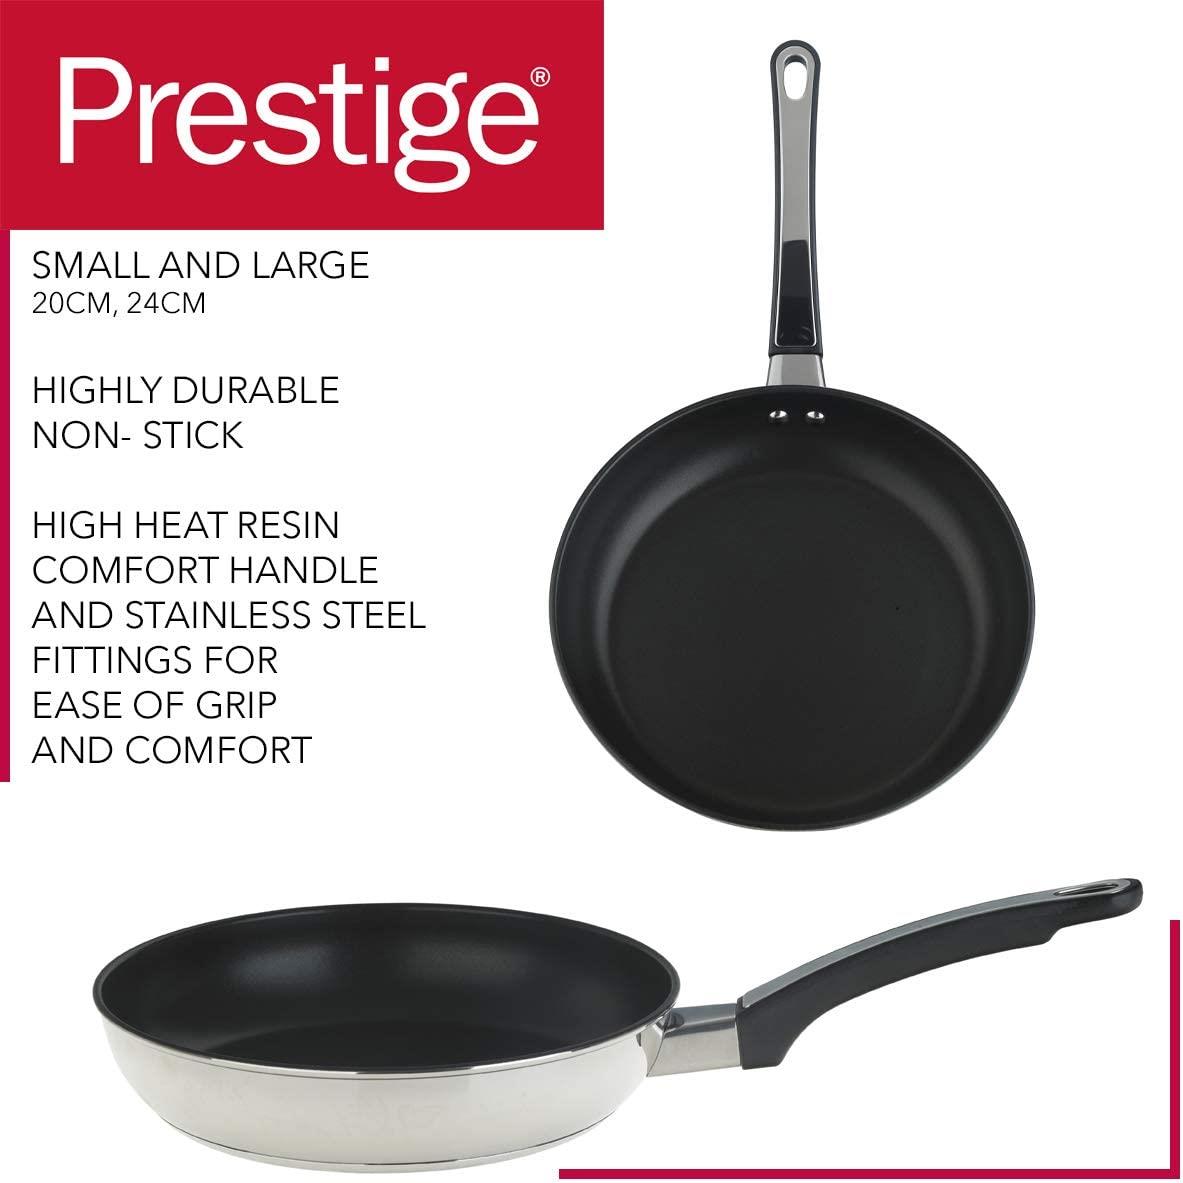 Prestige Everyday Cookware Set Stainless Steel 5 Piece Non Stick - 70106